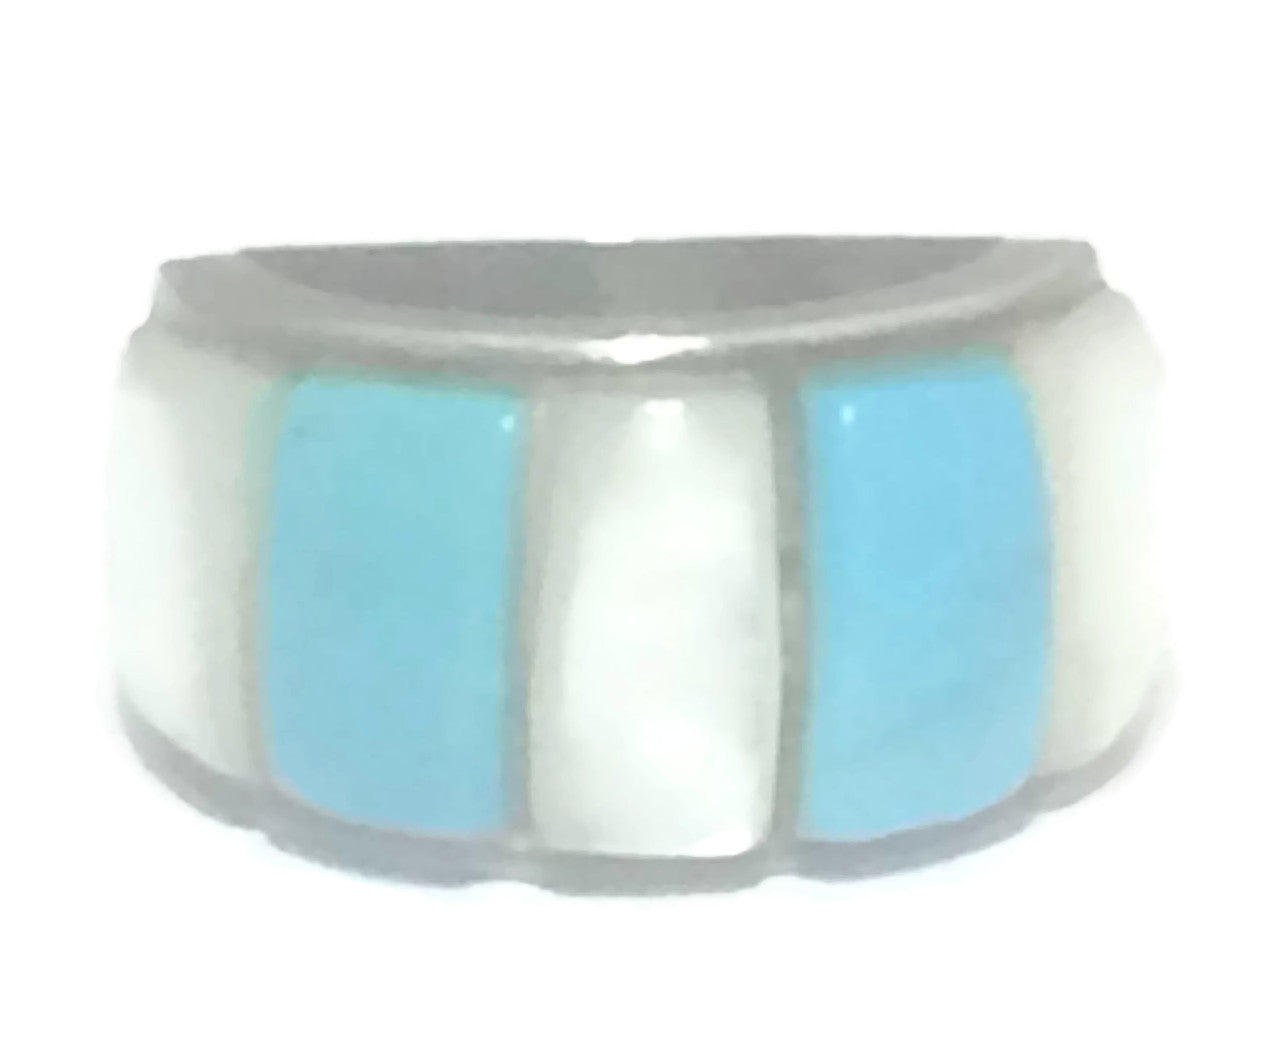 Turquoise Band MOP Southwest Sterling Silver Ring Size 4.7